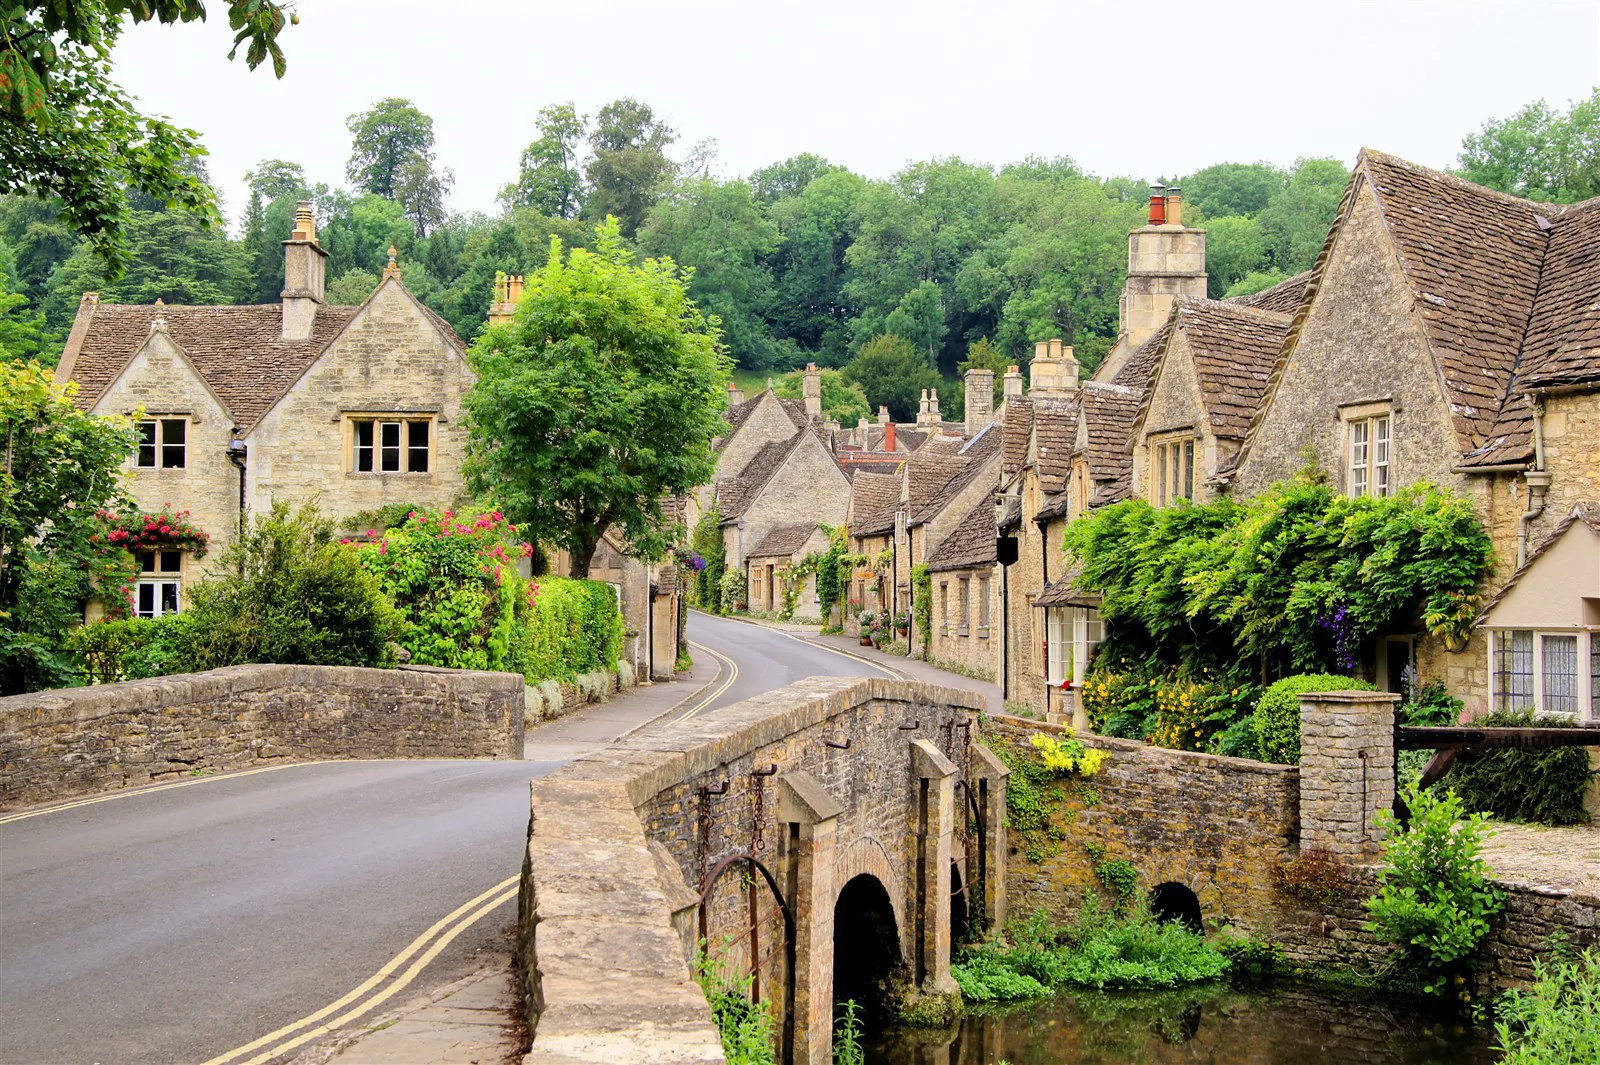 The beautiful village of Castle Combe in the Cotswolds